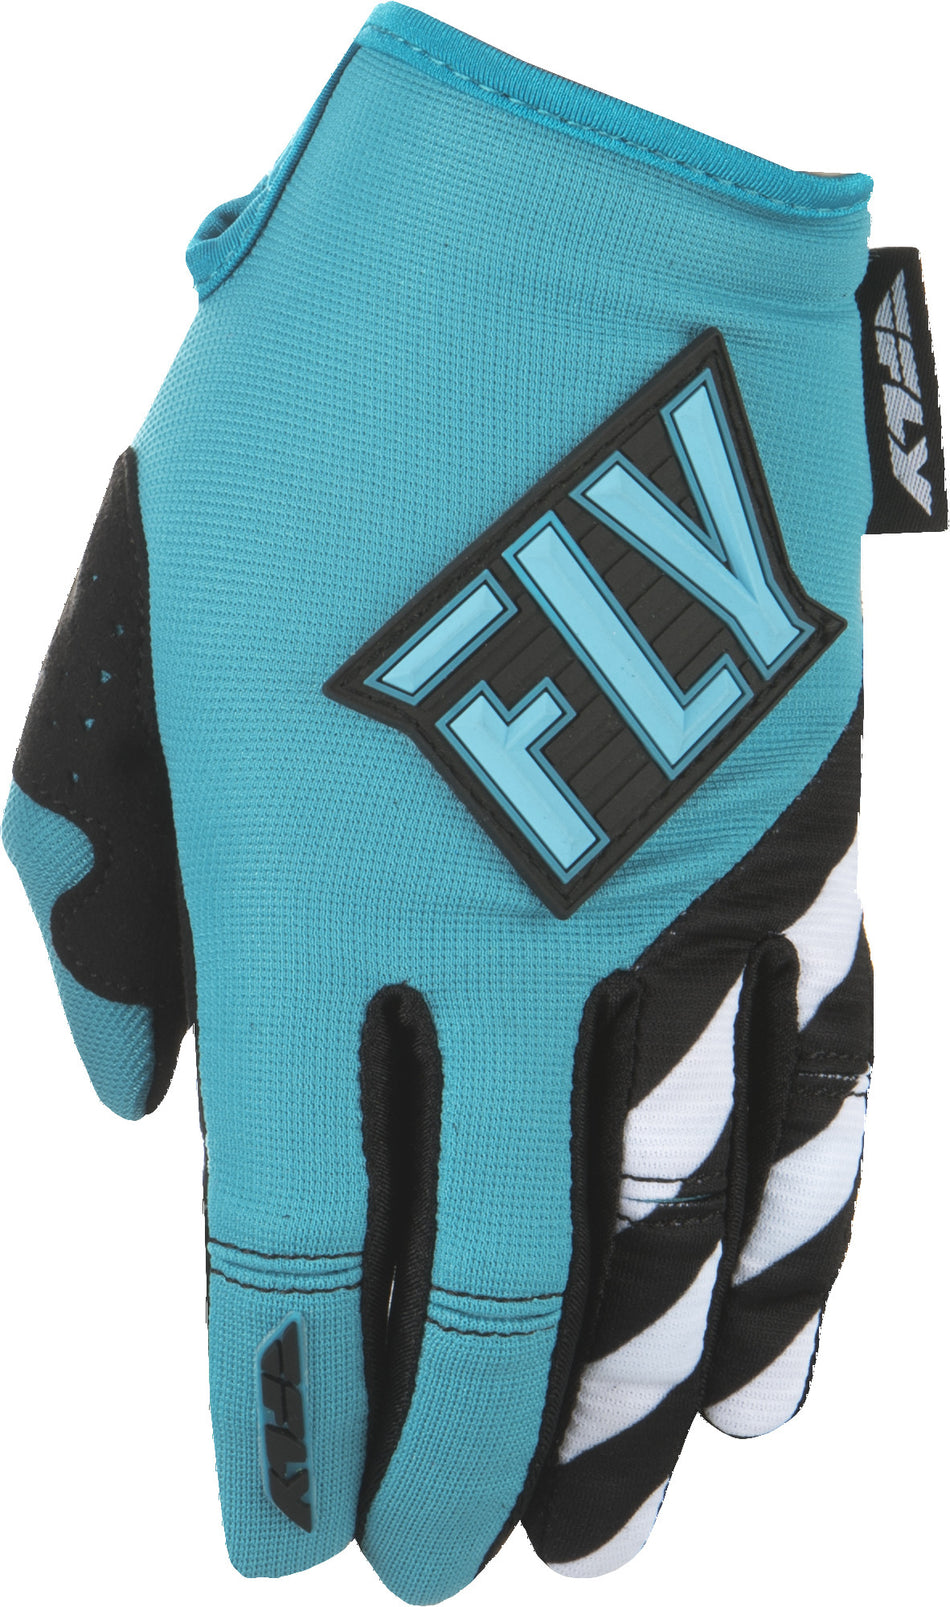 FLY RACING Kinetic Women's Gloves Blue/Teal 2x 371-61110